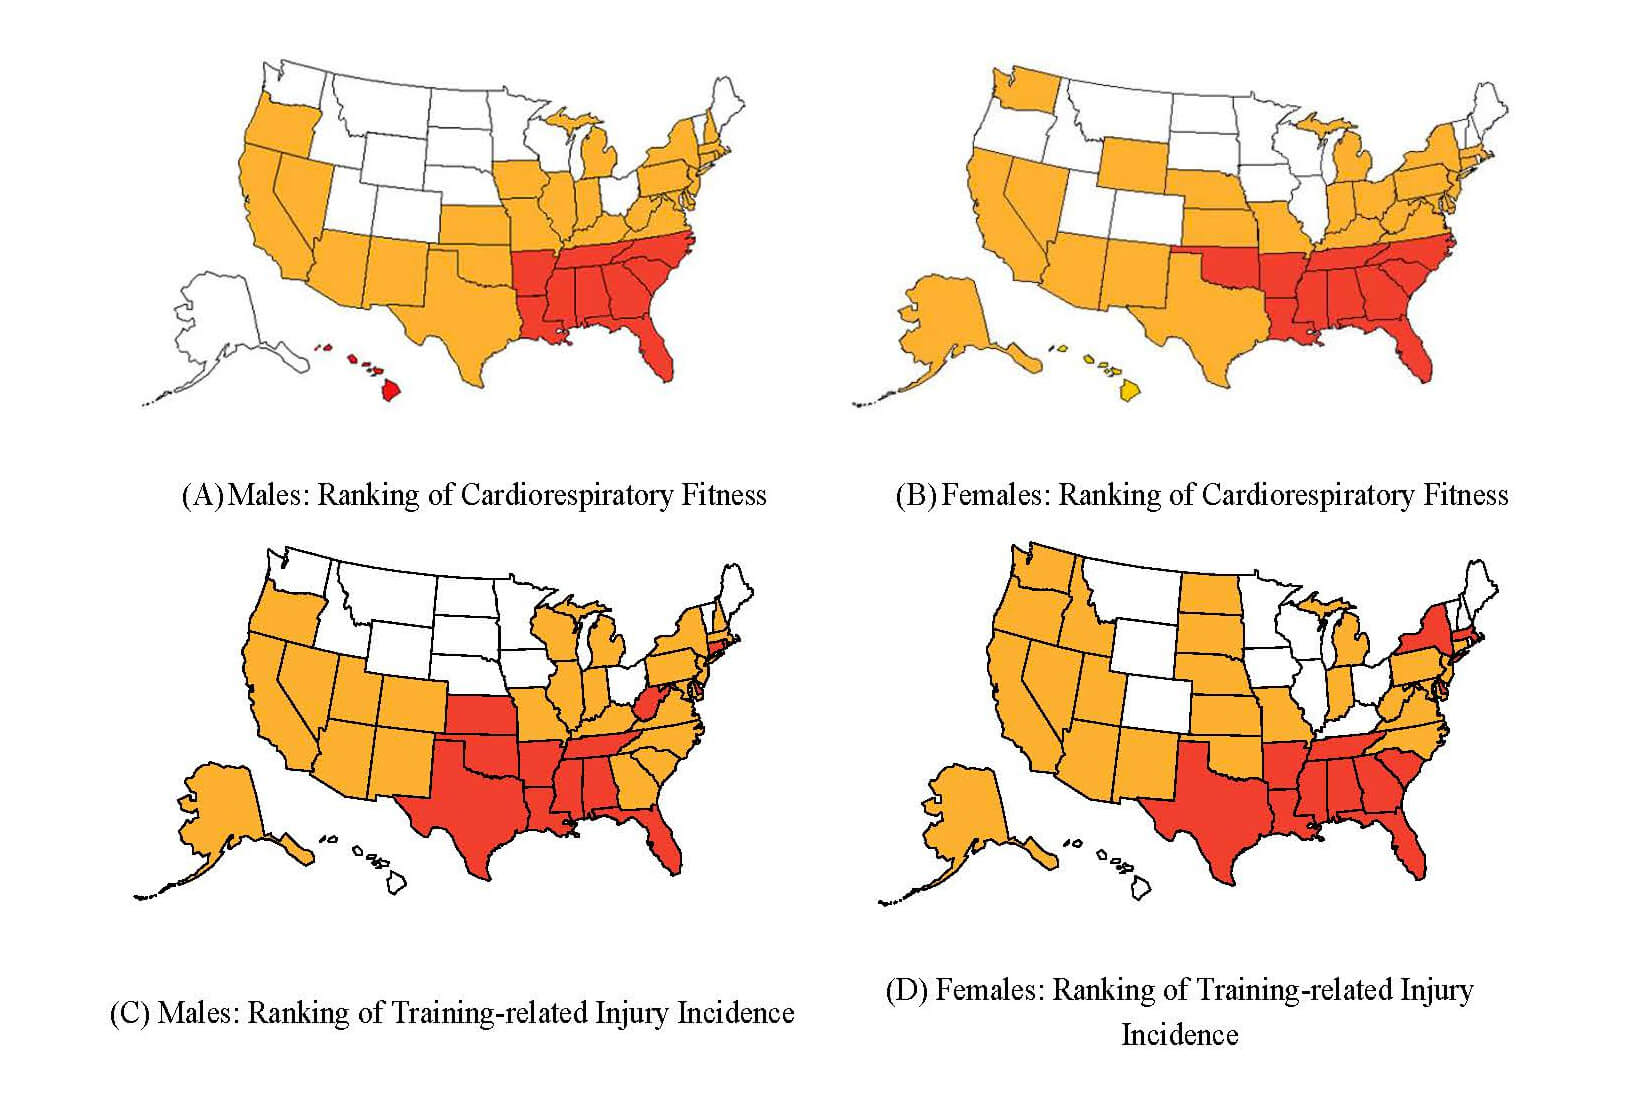 Military Recruits from Some Southern States Have Lower Fitness, More Injuries